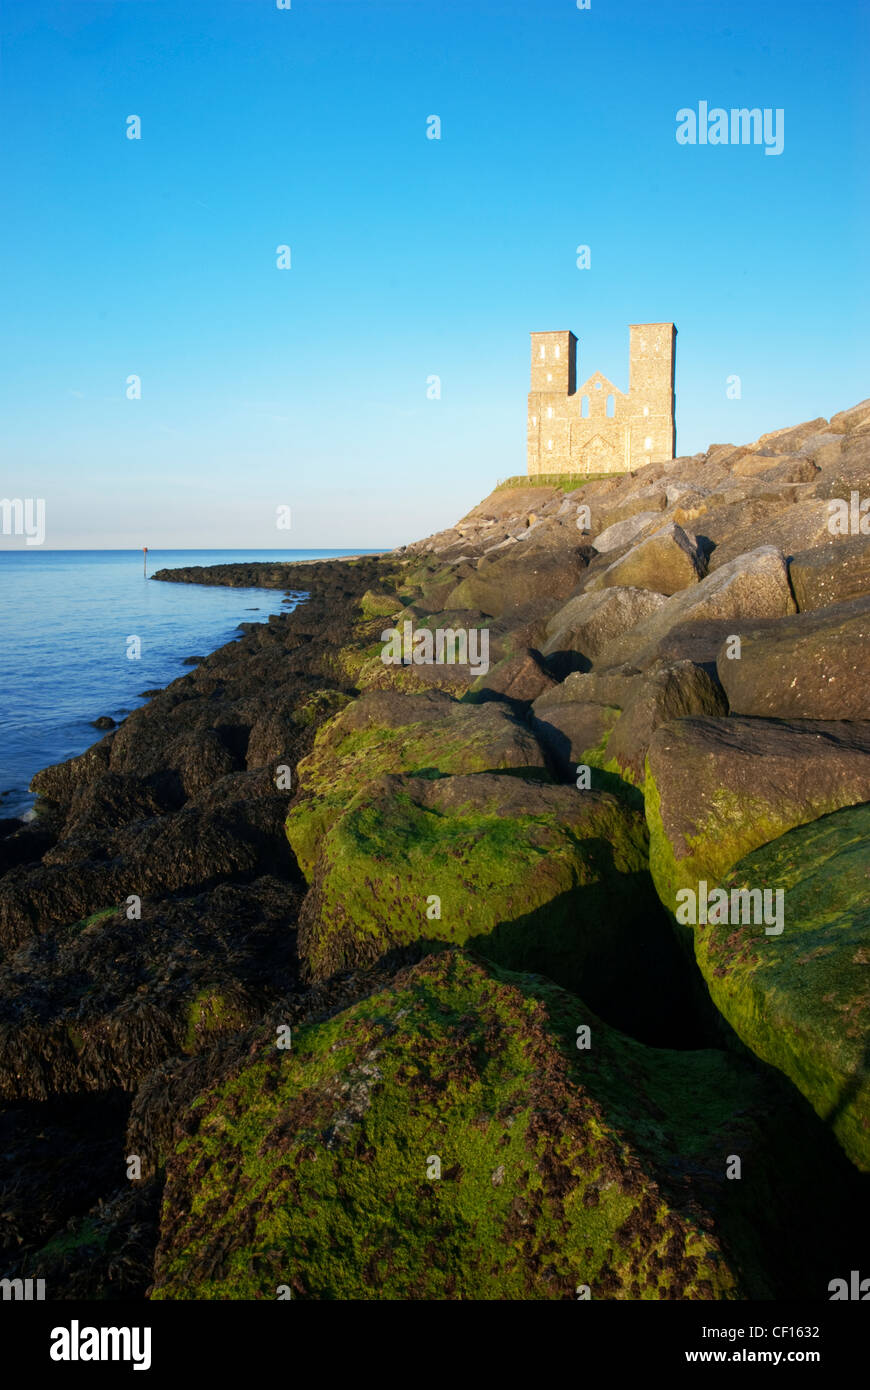 The Reculver Towers bathed in late afternoon sunshine Stock Photo